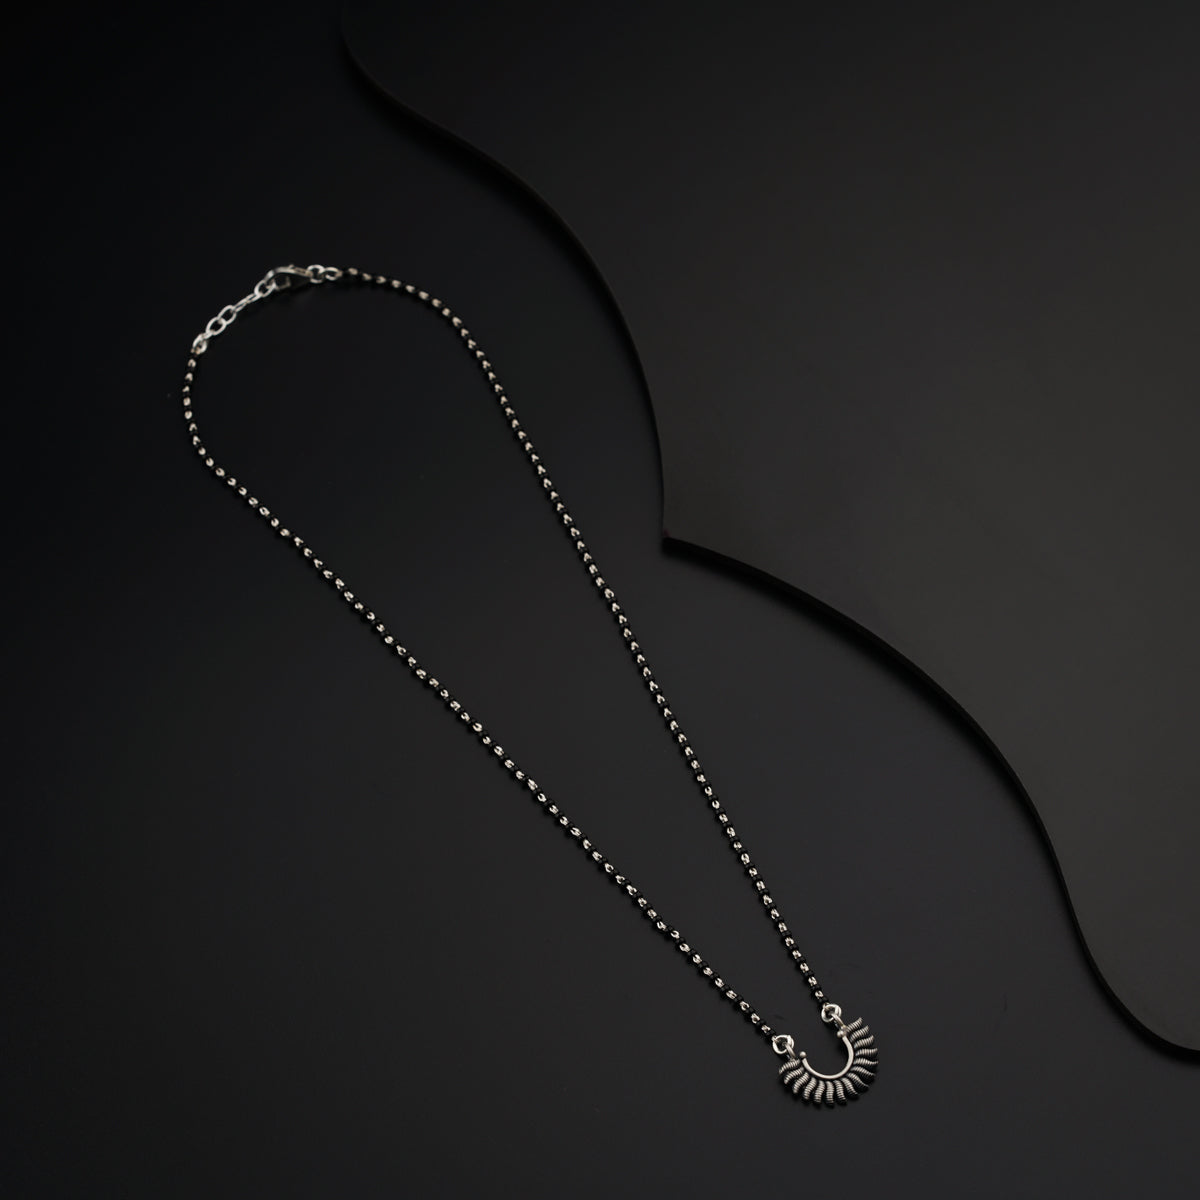 a long necklace with a silver pendant on a black background